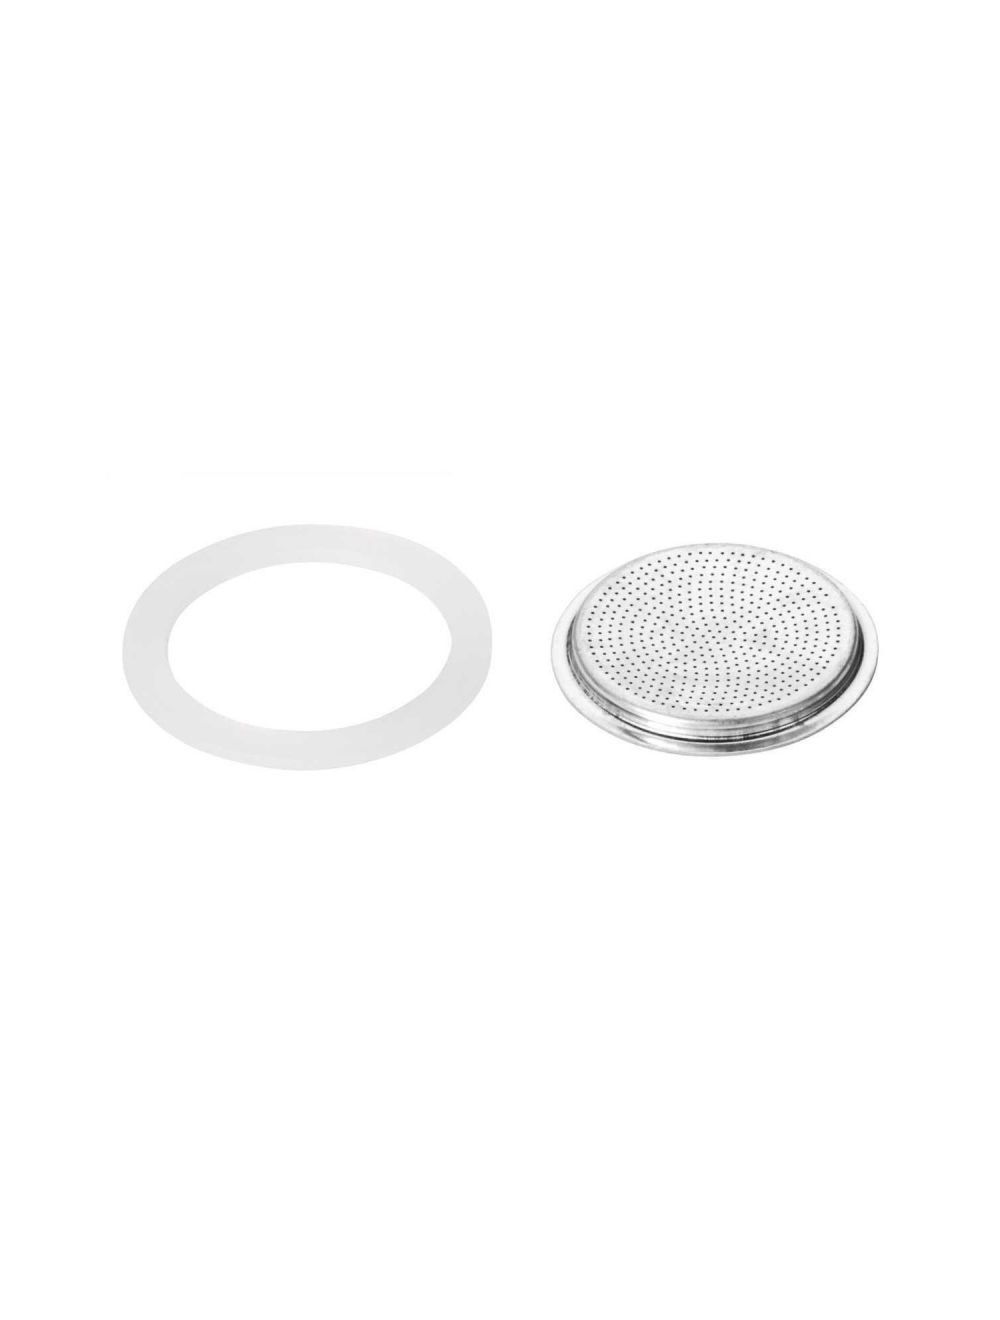 Silicon Seal and Filter 3cm 2Pc